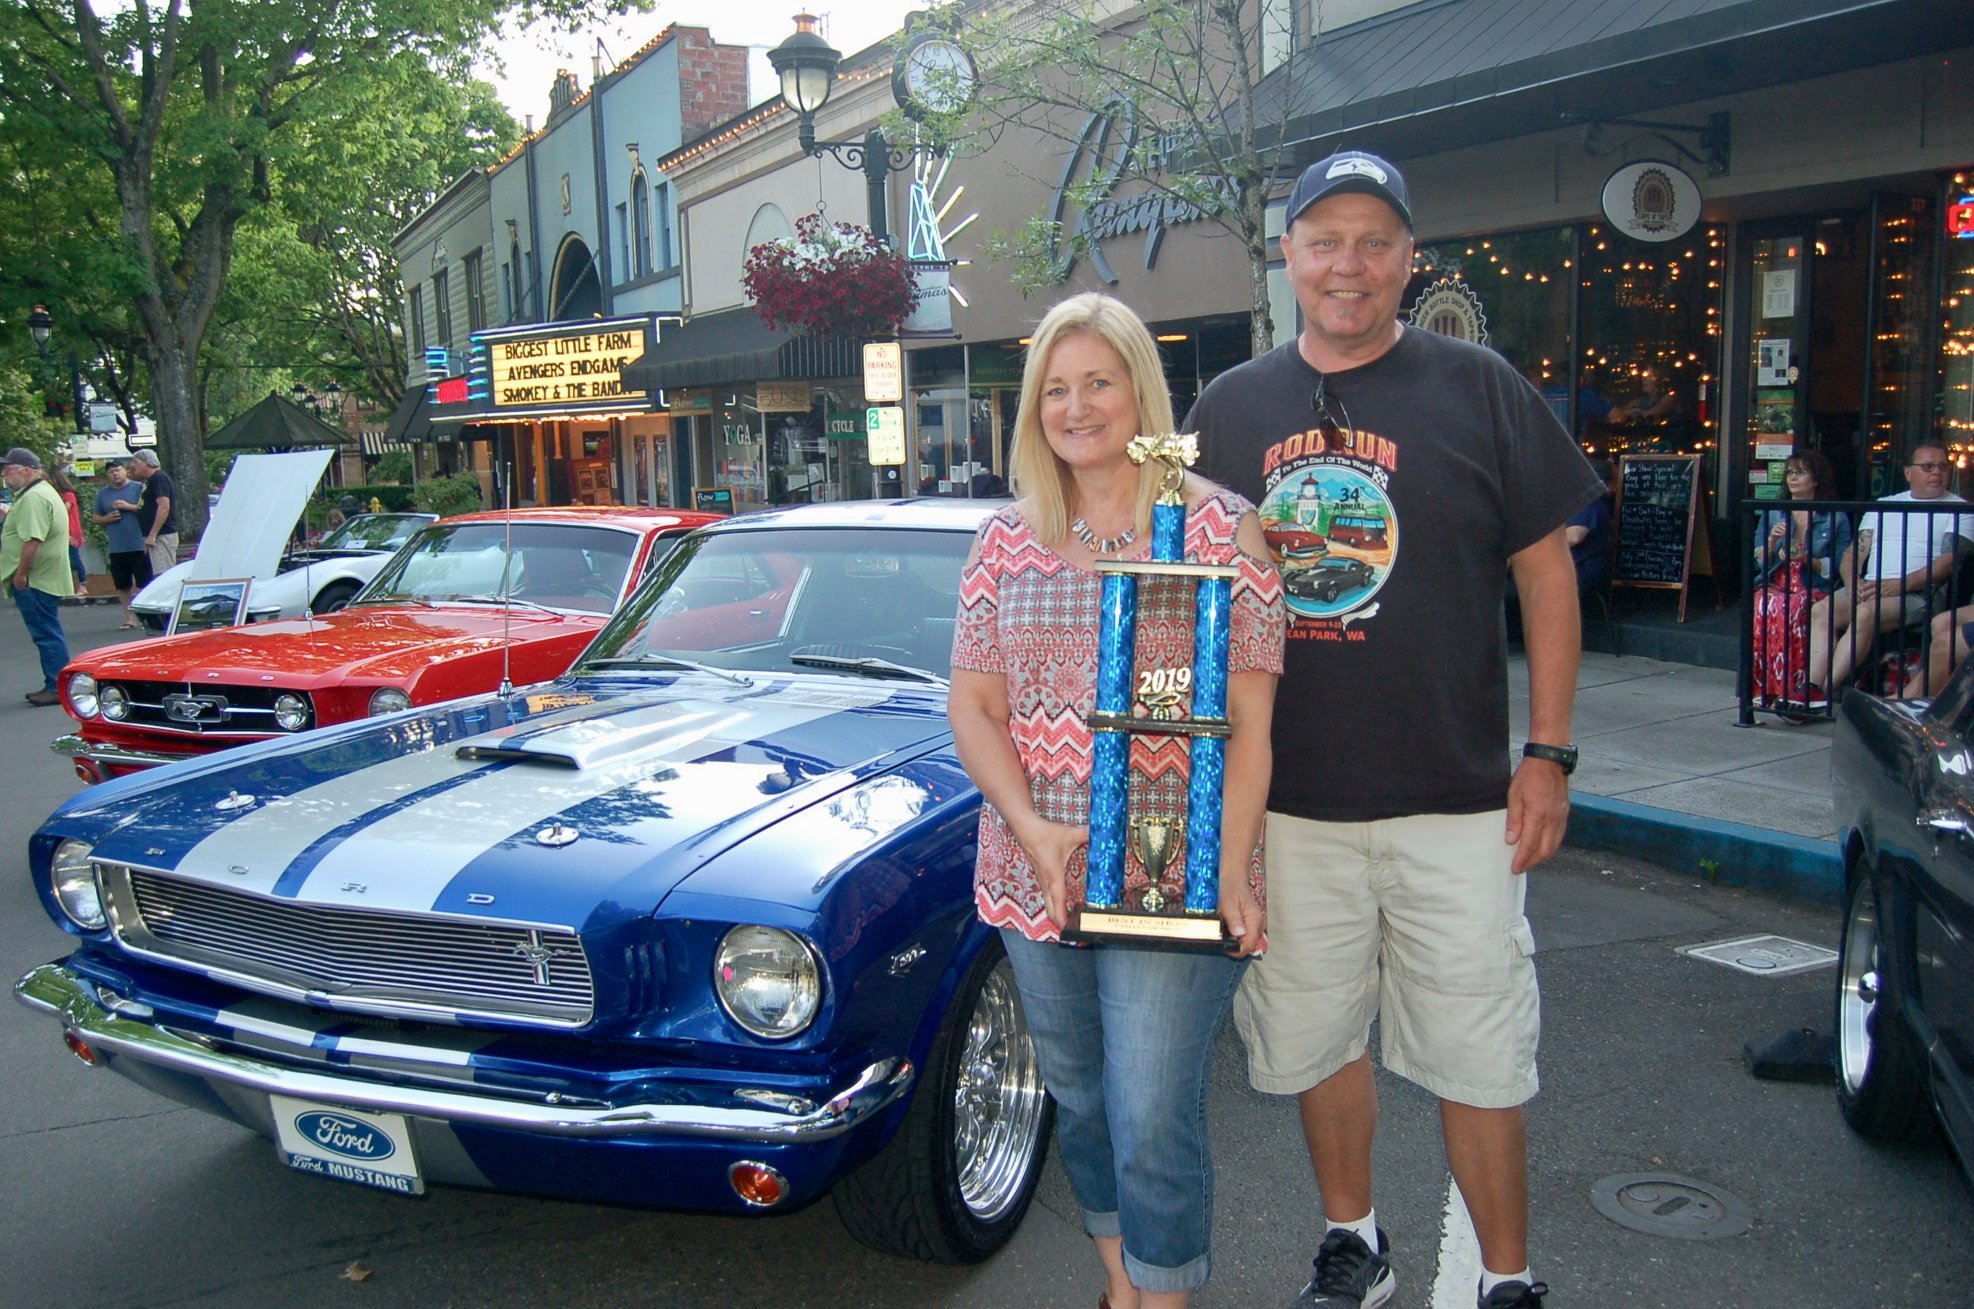 Events in Historic Downtown Camas • Downtown Camas Shops, Restaurants